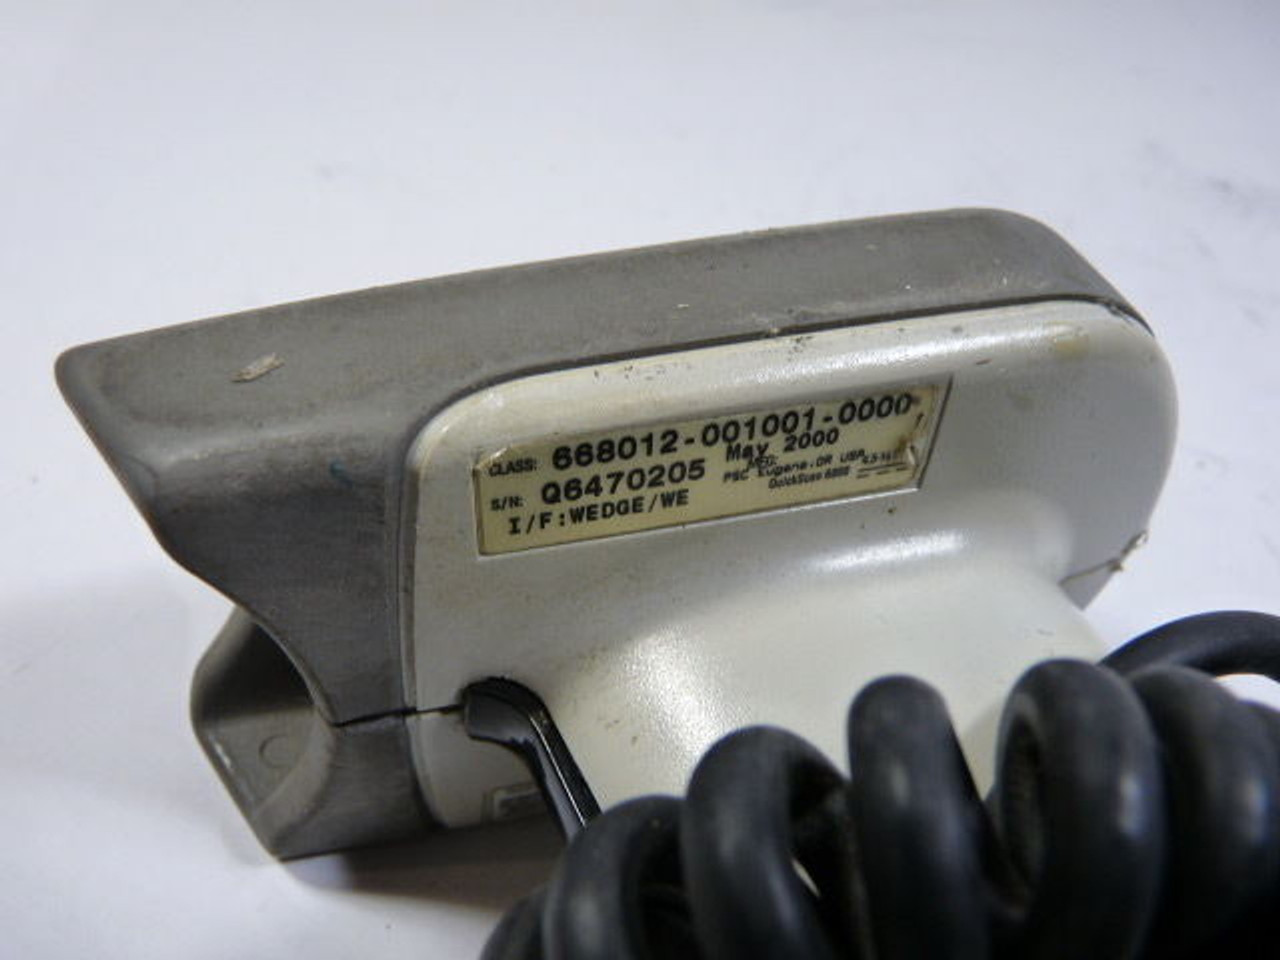 PSC 668012-001001-0000 Barcode Scanner USED